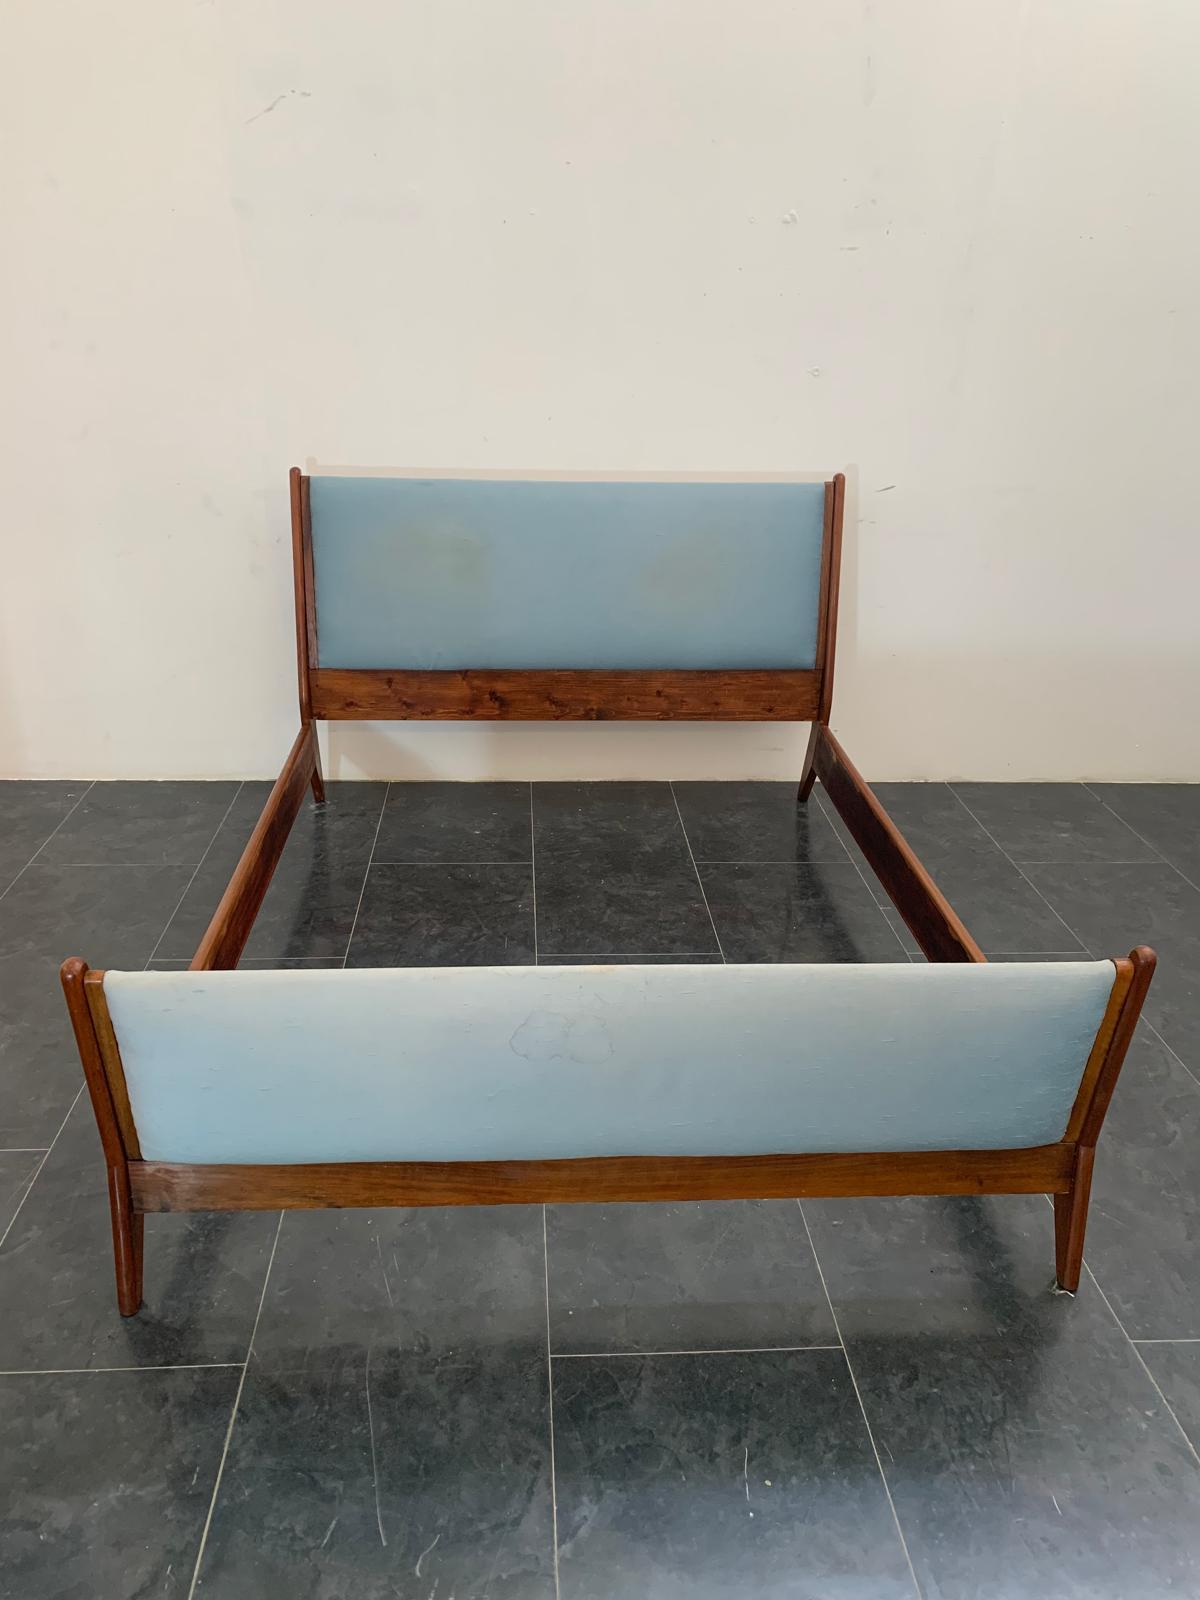 Rosewood and fabric bed with orthopedic bed base by Frauflex, 1960s-70s. Imposing and sturdy. The style echoes that of Ico Parisi. The bed base is orthopedic and rigid; weight is about 80 kg. Manufacturer's label present. Inside measurements: 201 x